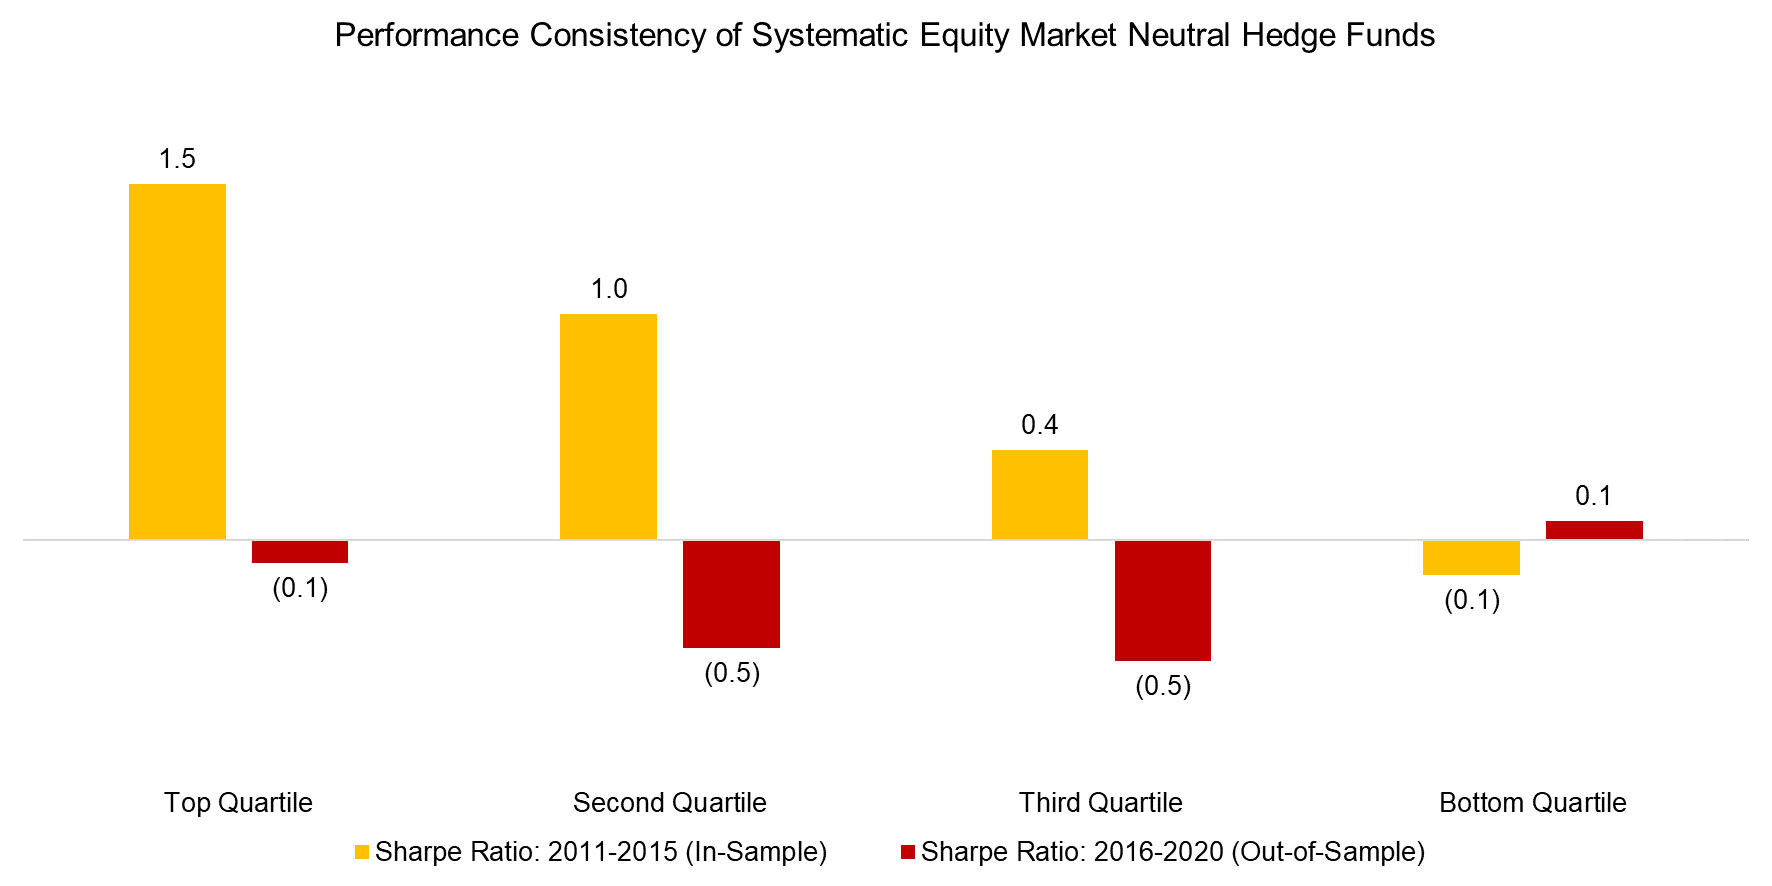 Performance Consistency of Systematic Equity Market Neutral Hedge Funds